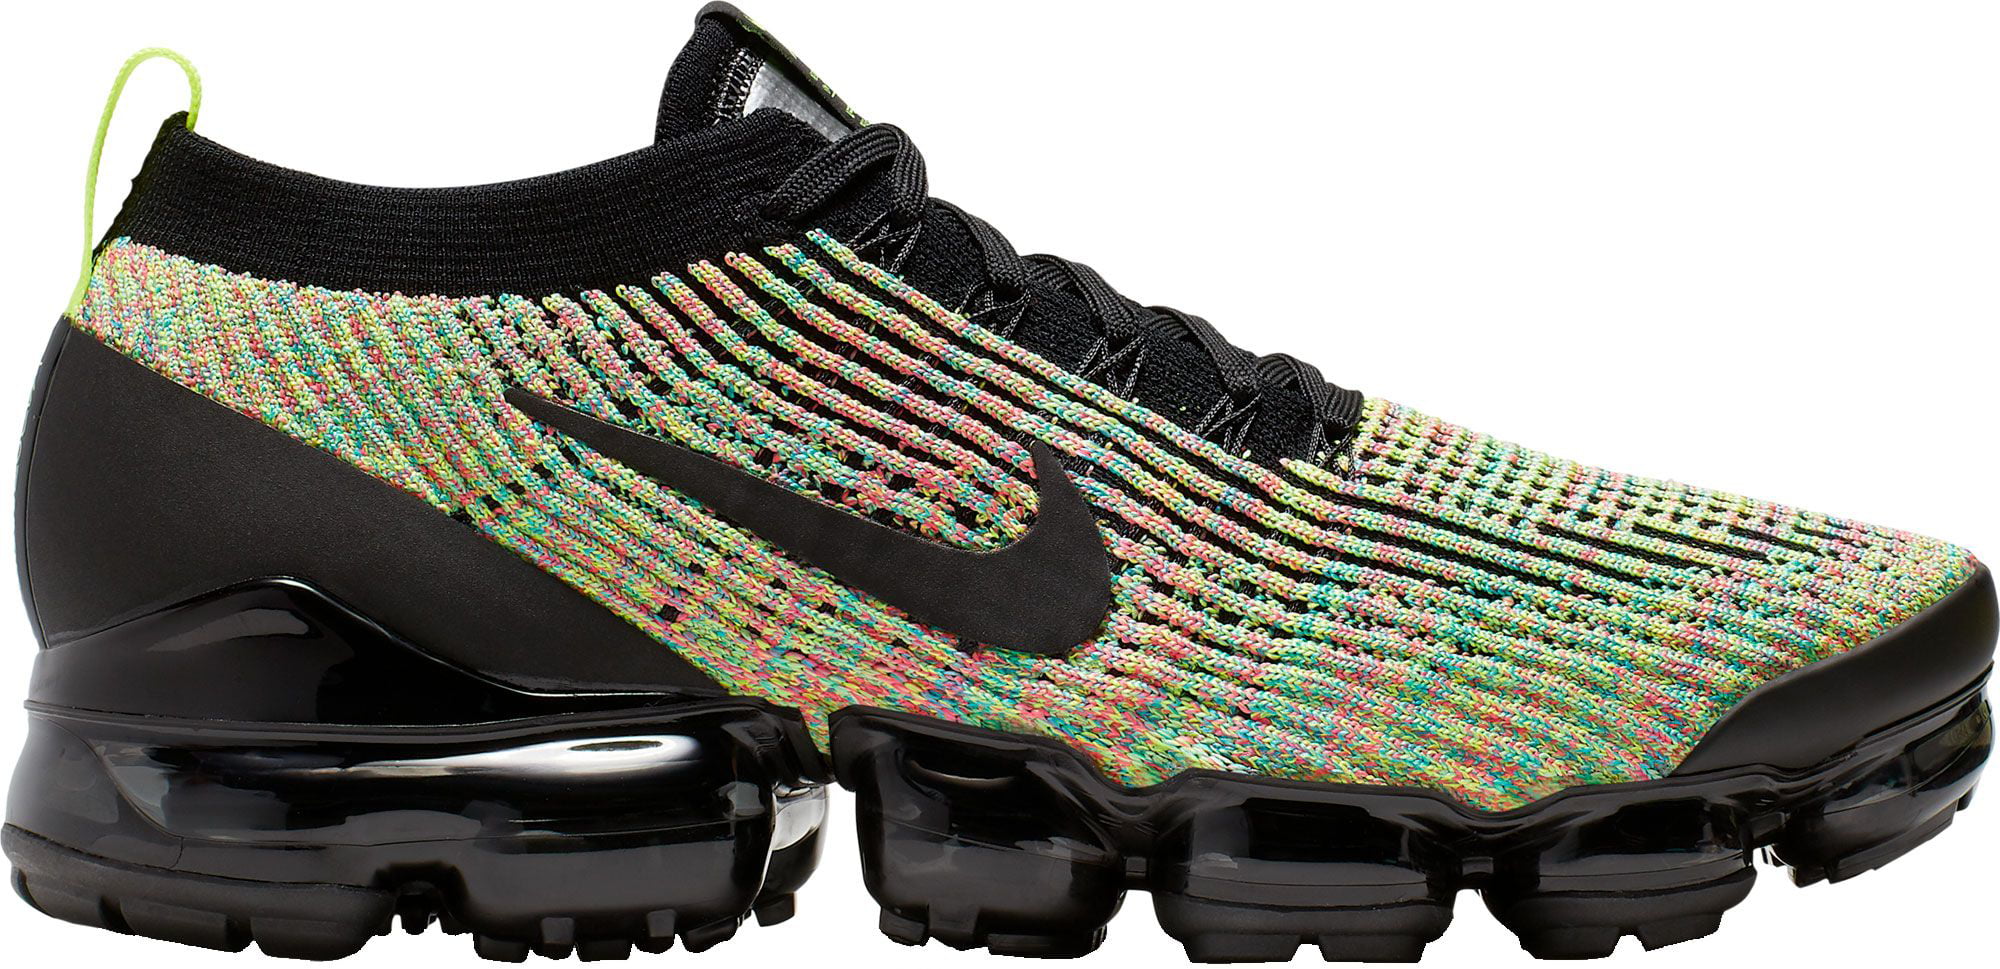 vapormax flyknit shoes